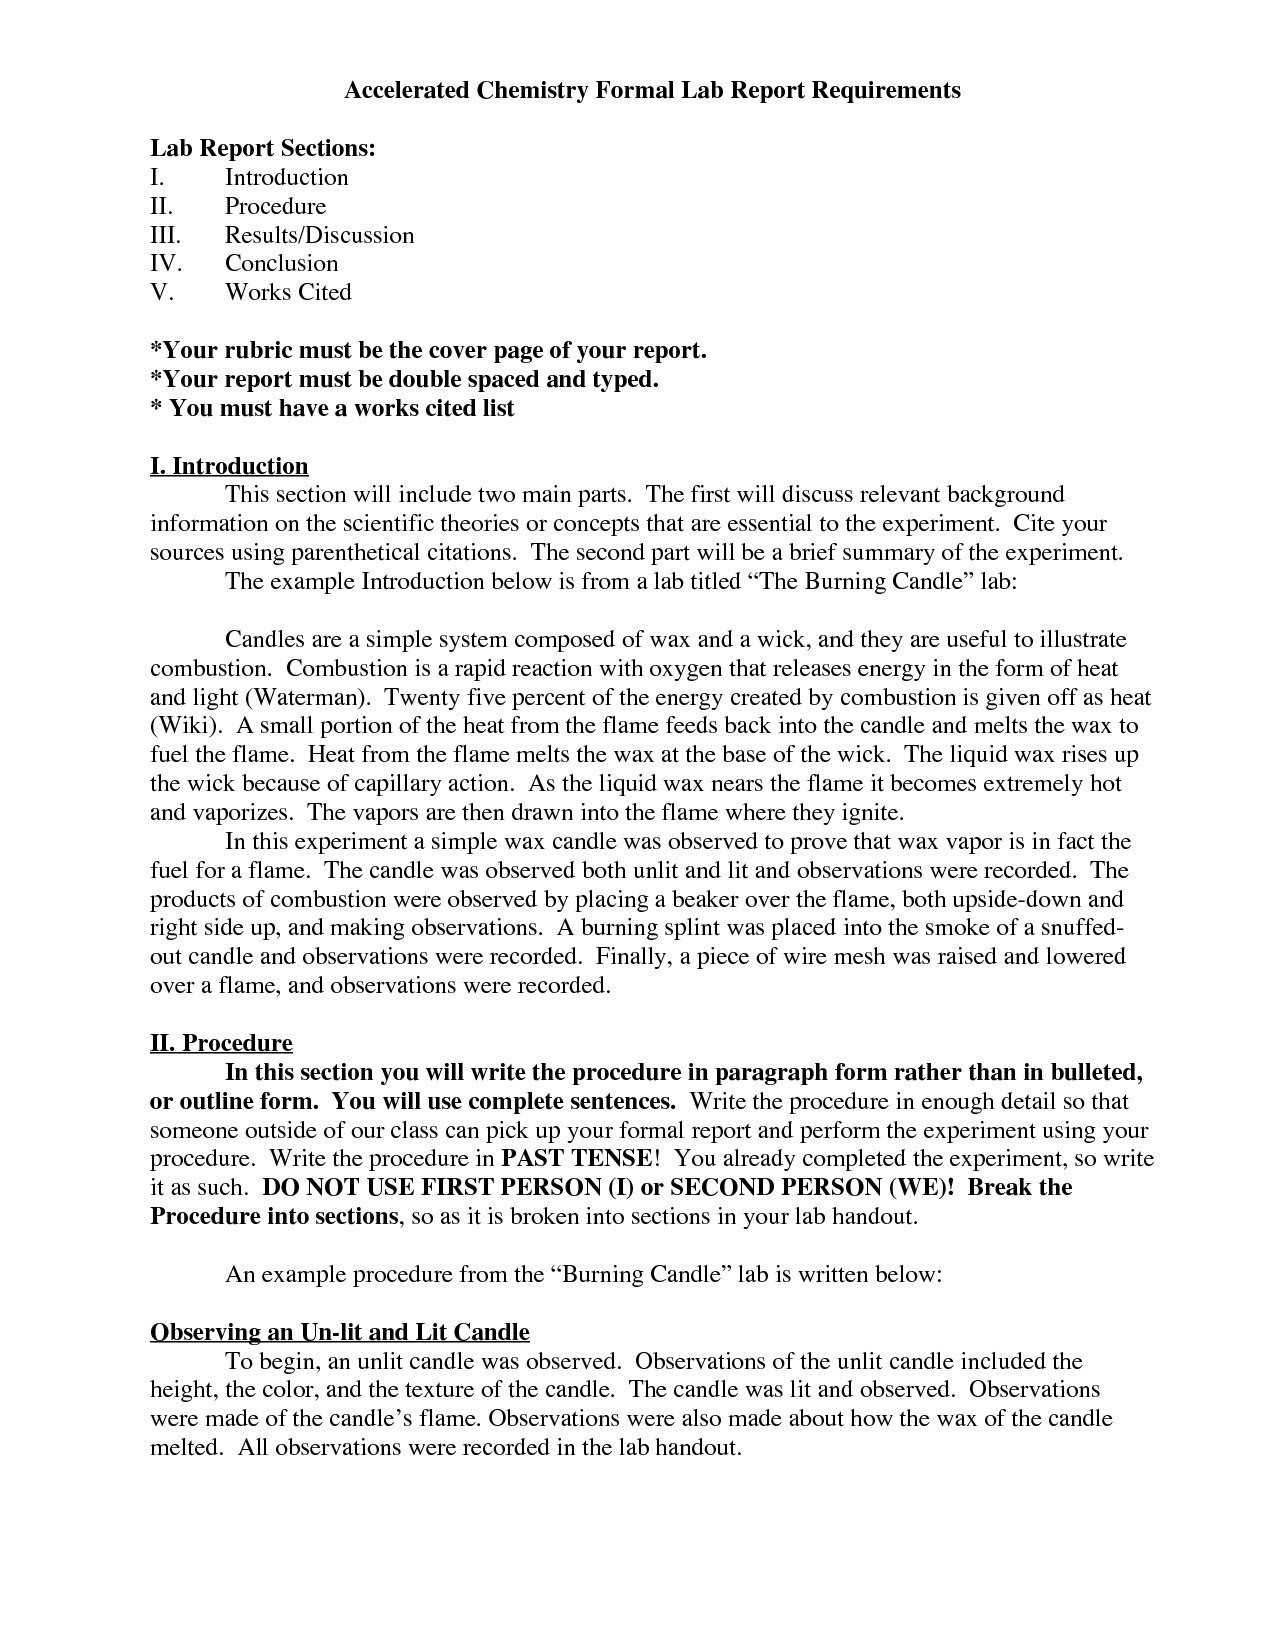 Ib Lab Report Template – Atlantaauctionco For Ib Lab Report Template